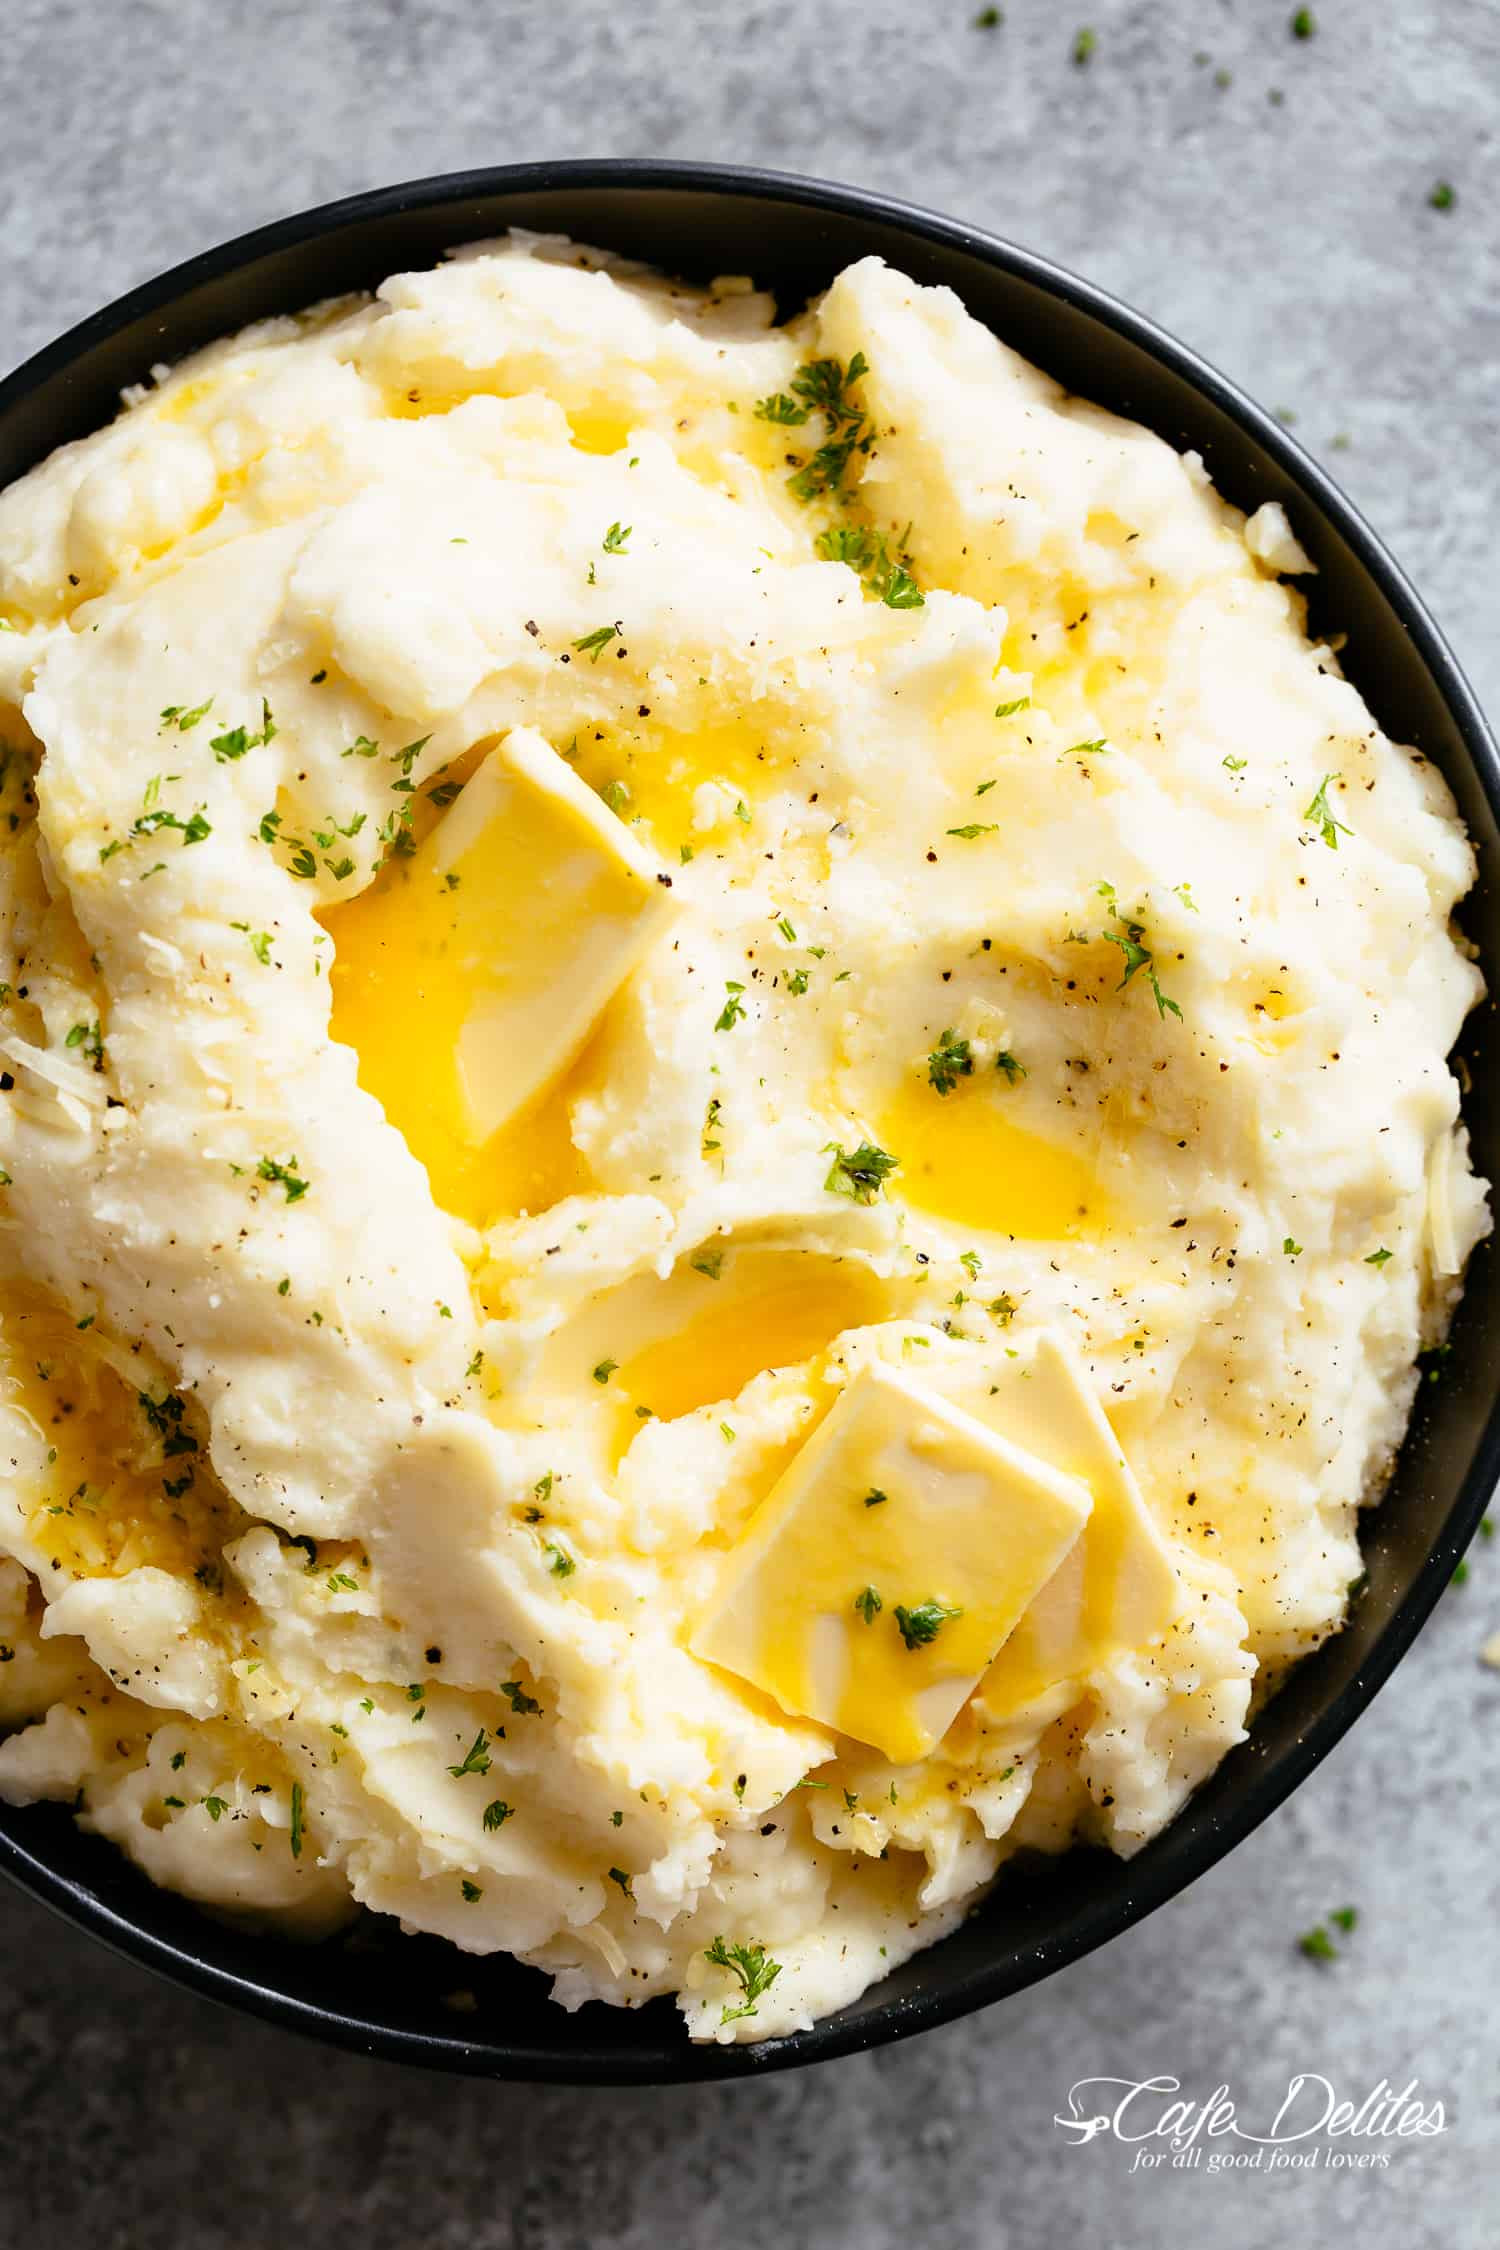 Mashed Potatoes For Thanksgiving
 Easy Creamy Mashed Potatoes Recipe Cafe Delites